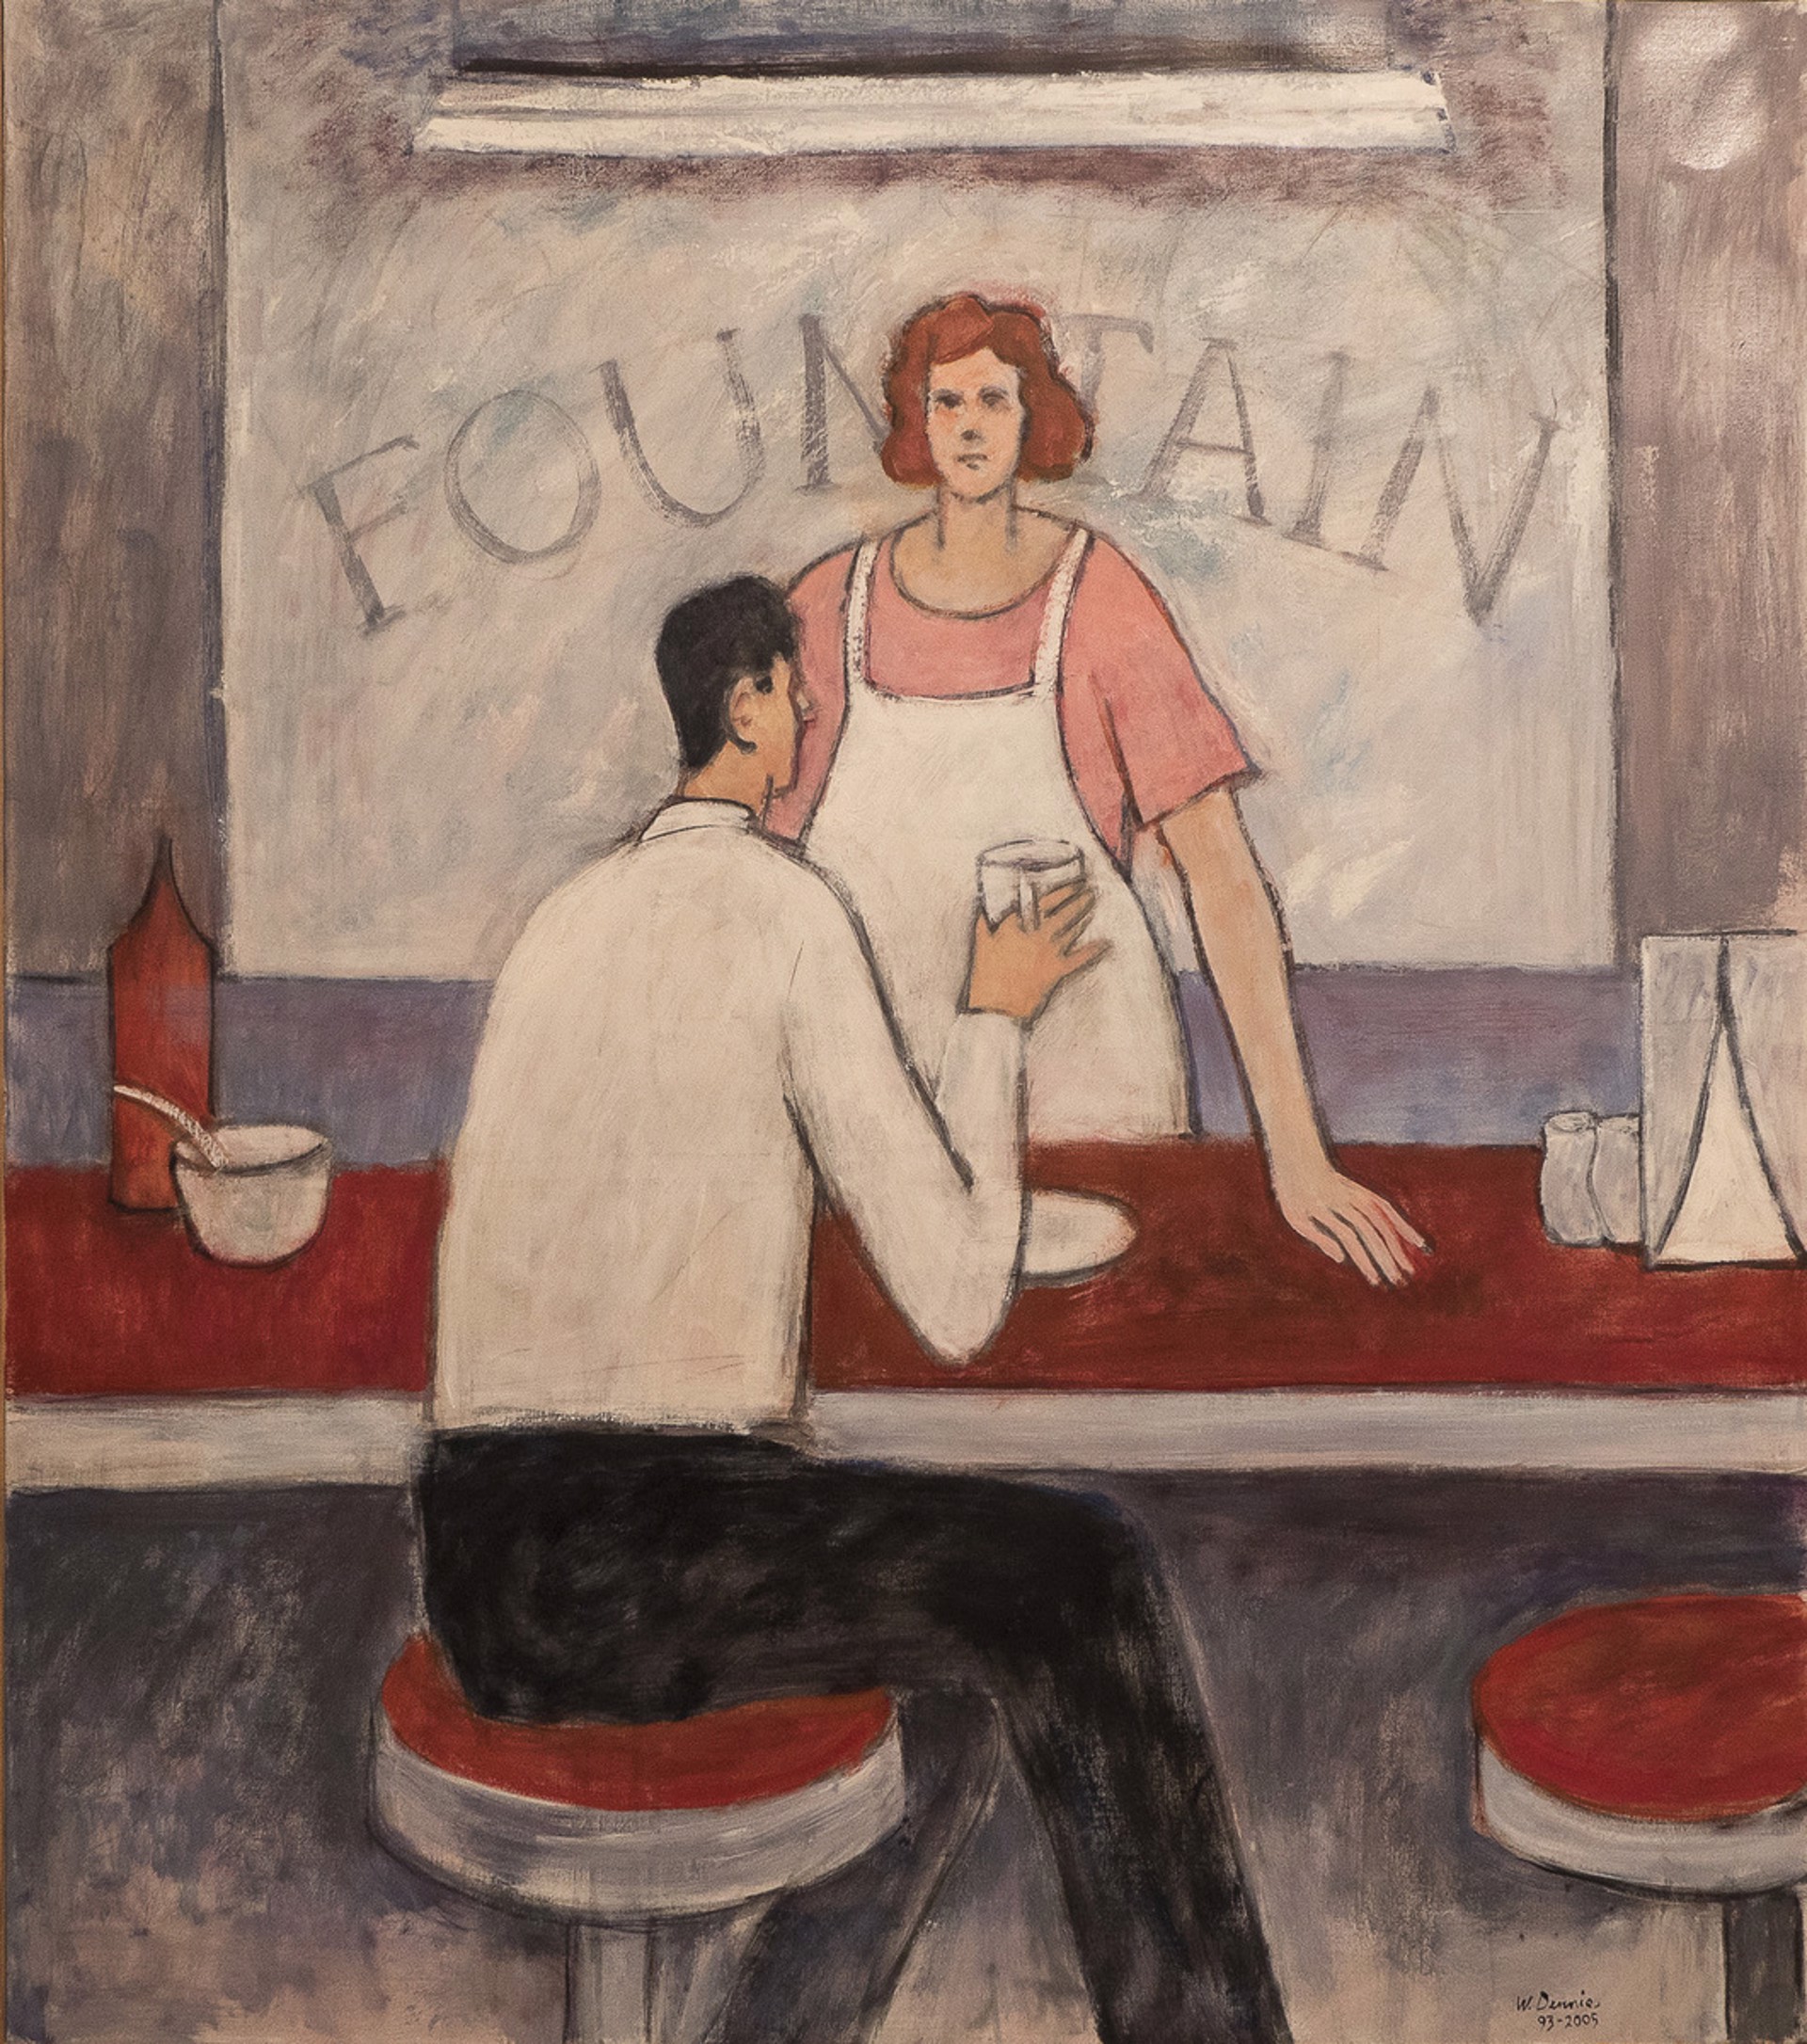 woman and man pink white red and black and gray man seated at read diner counter woman in pink shirt and apron